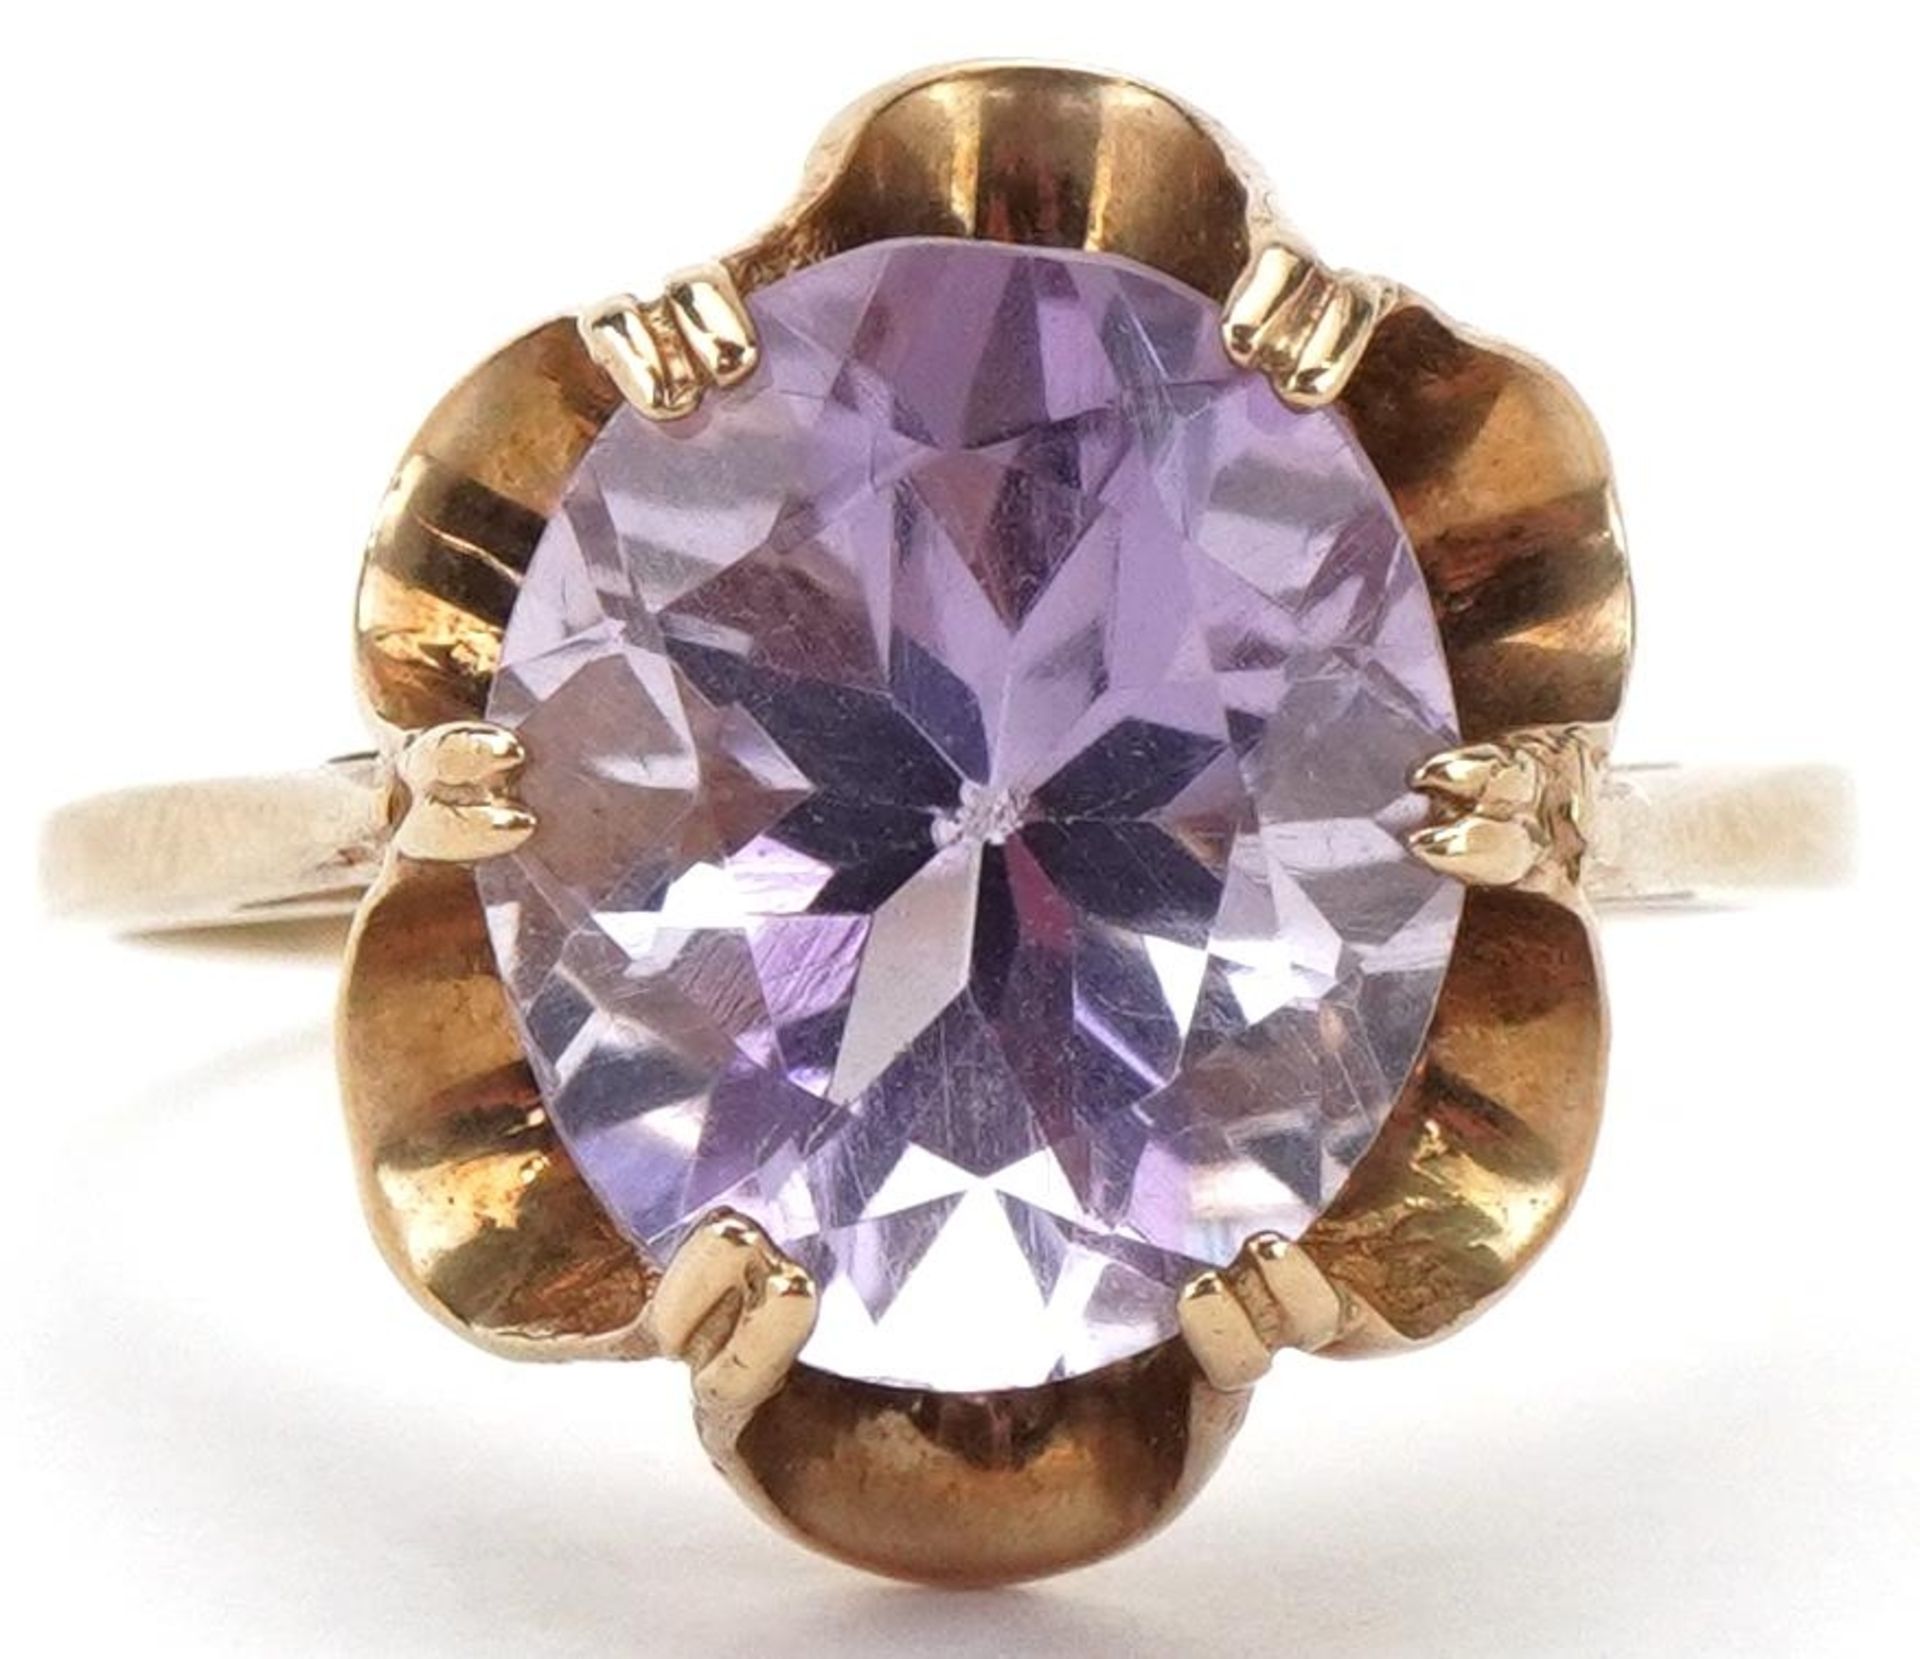 9ct gold amethyst solitaire ring, the amethyst approximately 11.80mm x 10.80mm x 7.40mm deep, size